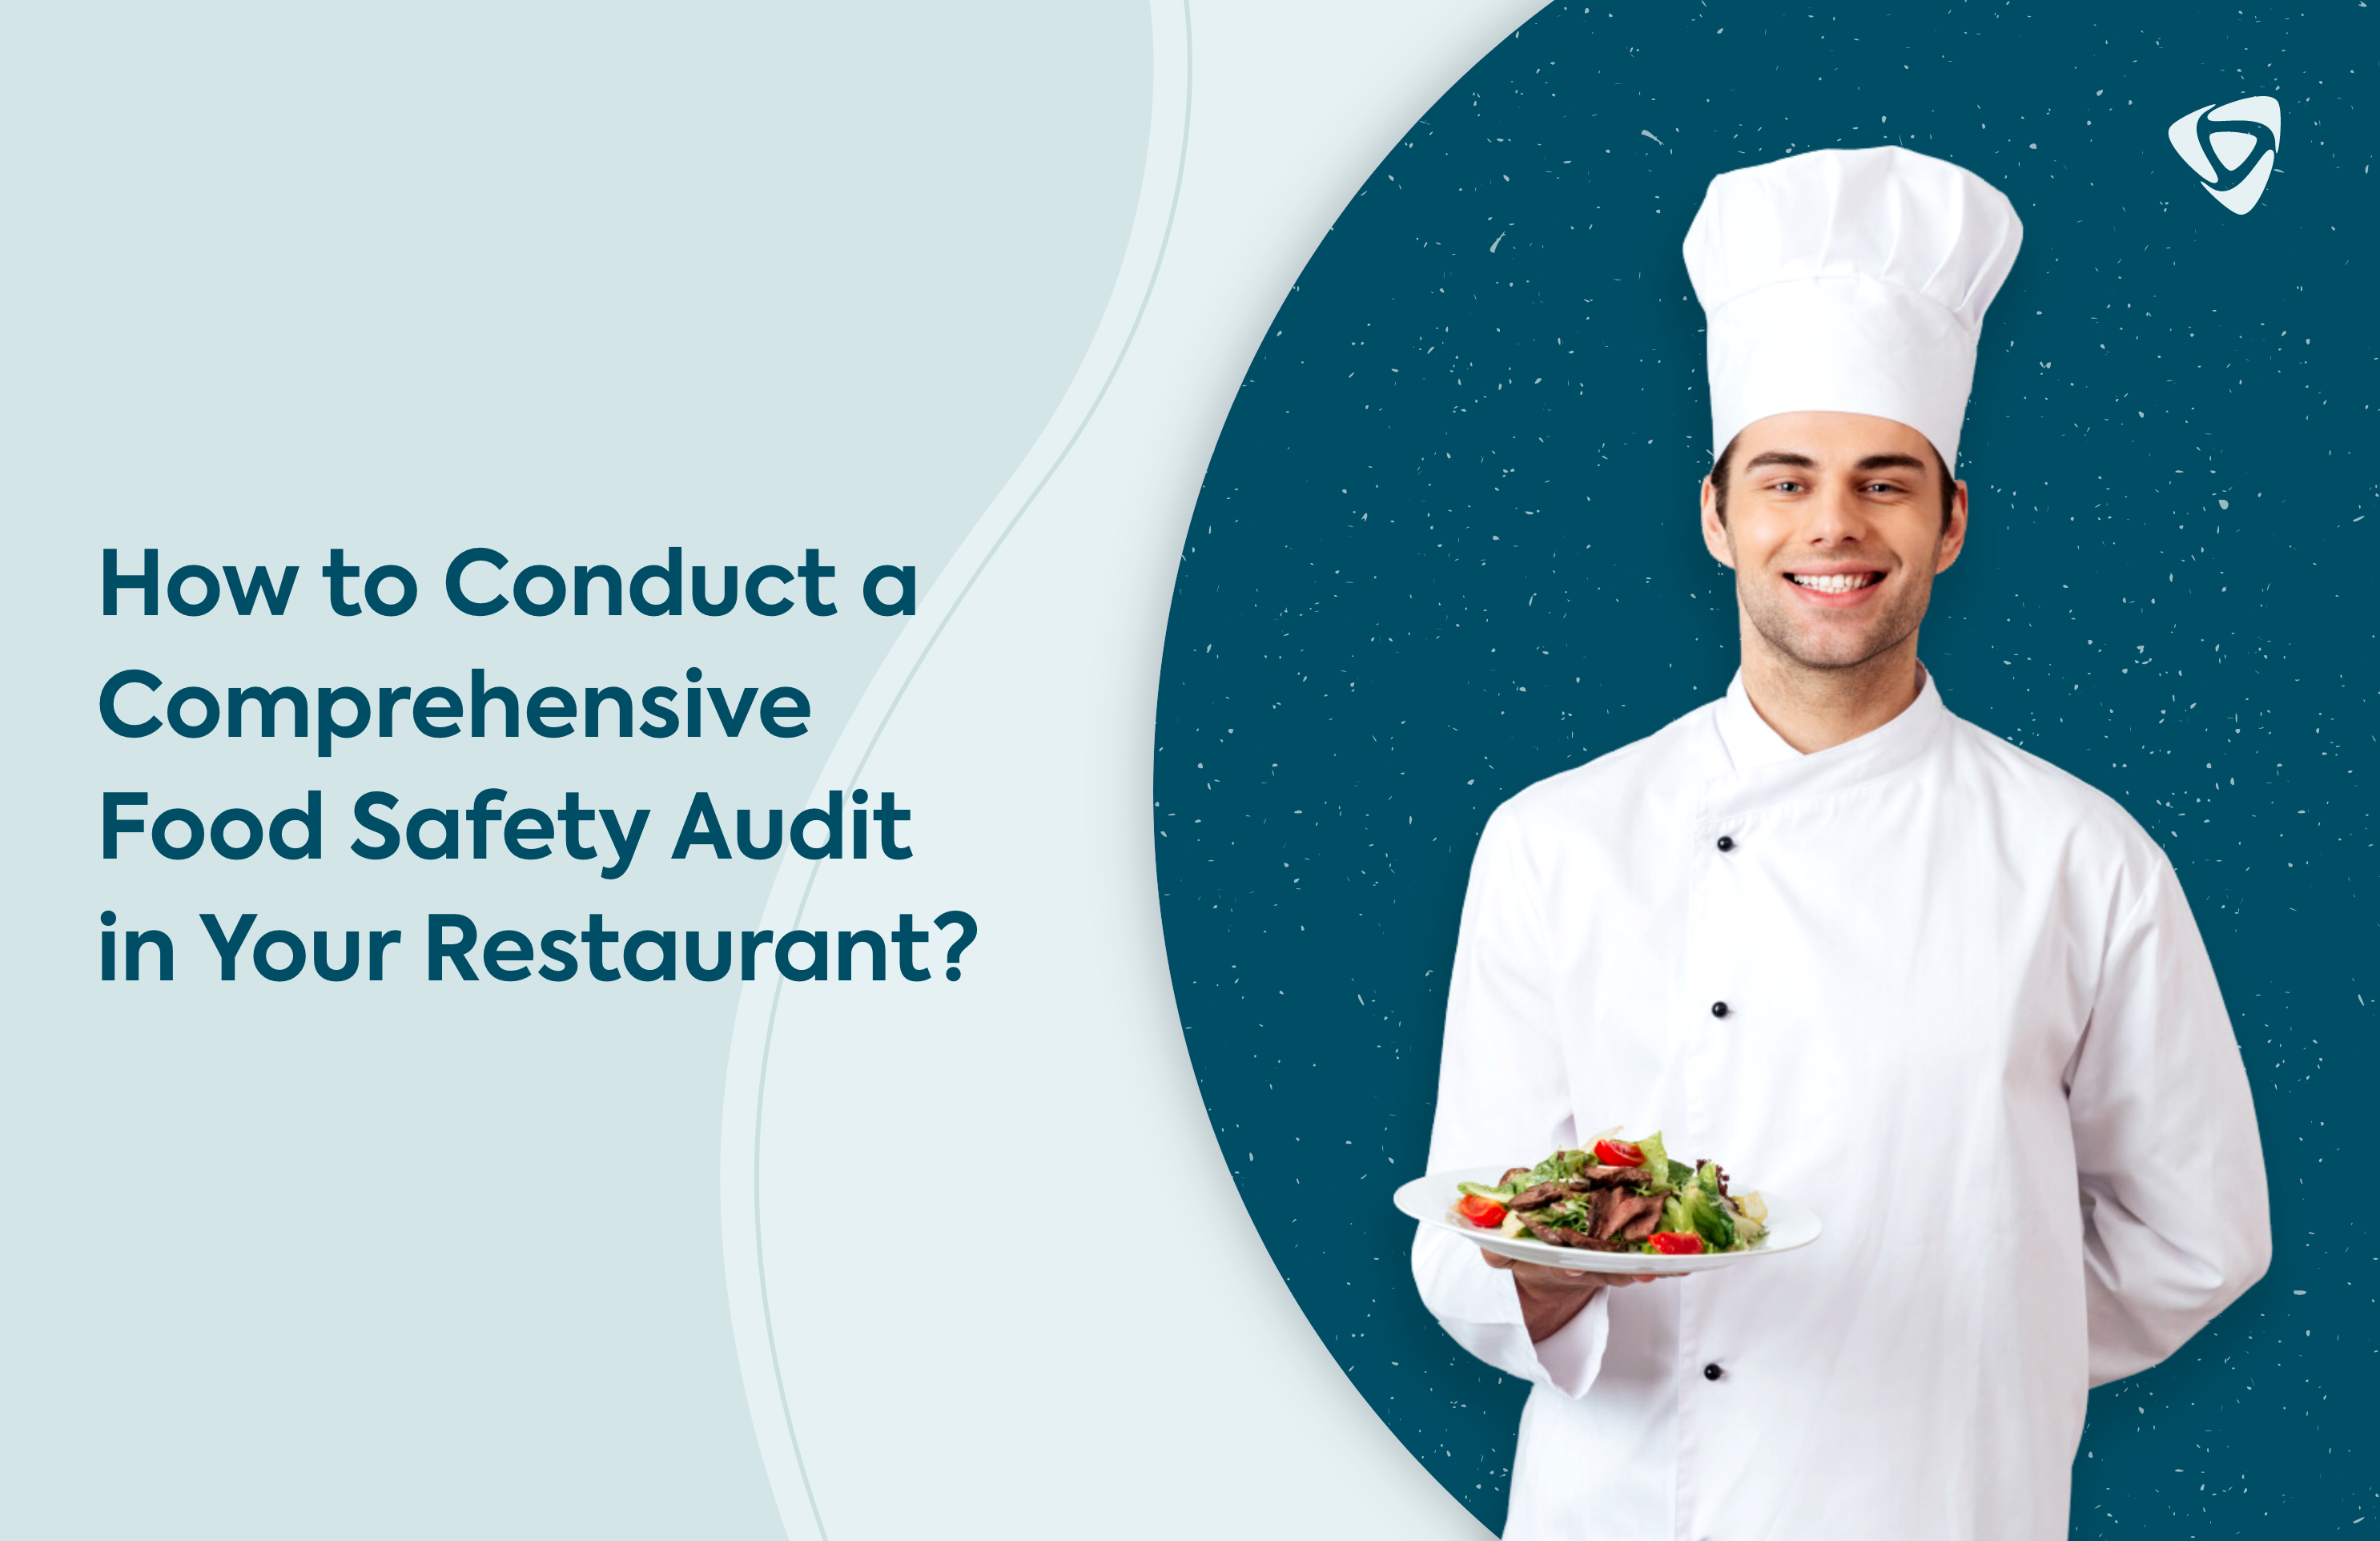 How to Conduct a Comprehensive Food Safety Audit in Your Restaurant?